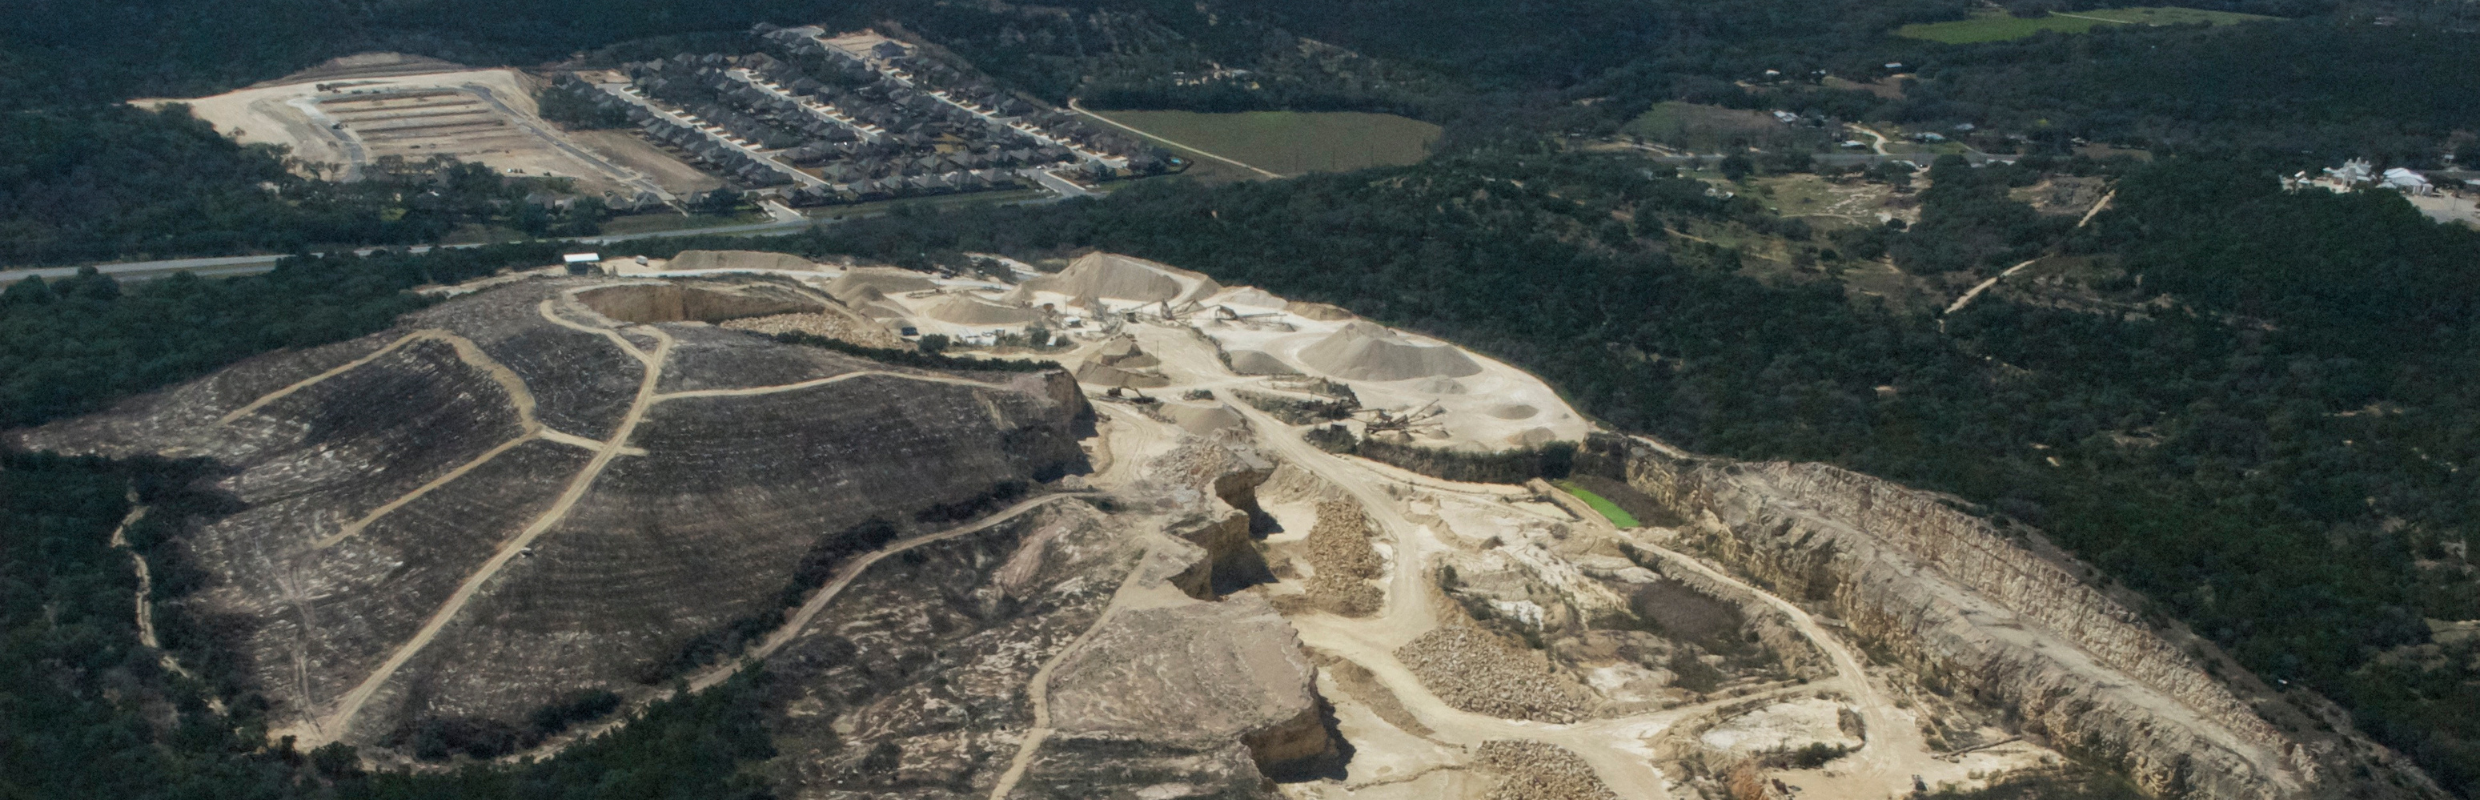 An aerial photograph shows a dramatic view of a massive gravel mine rising out of the woods next to a neighborhood and natural scenery - like a tan-colored scar on the land.